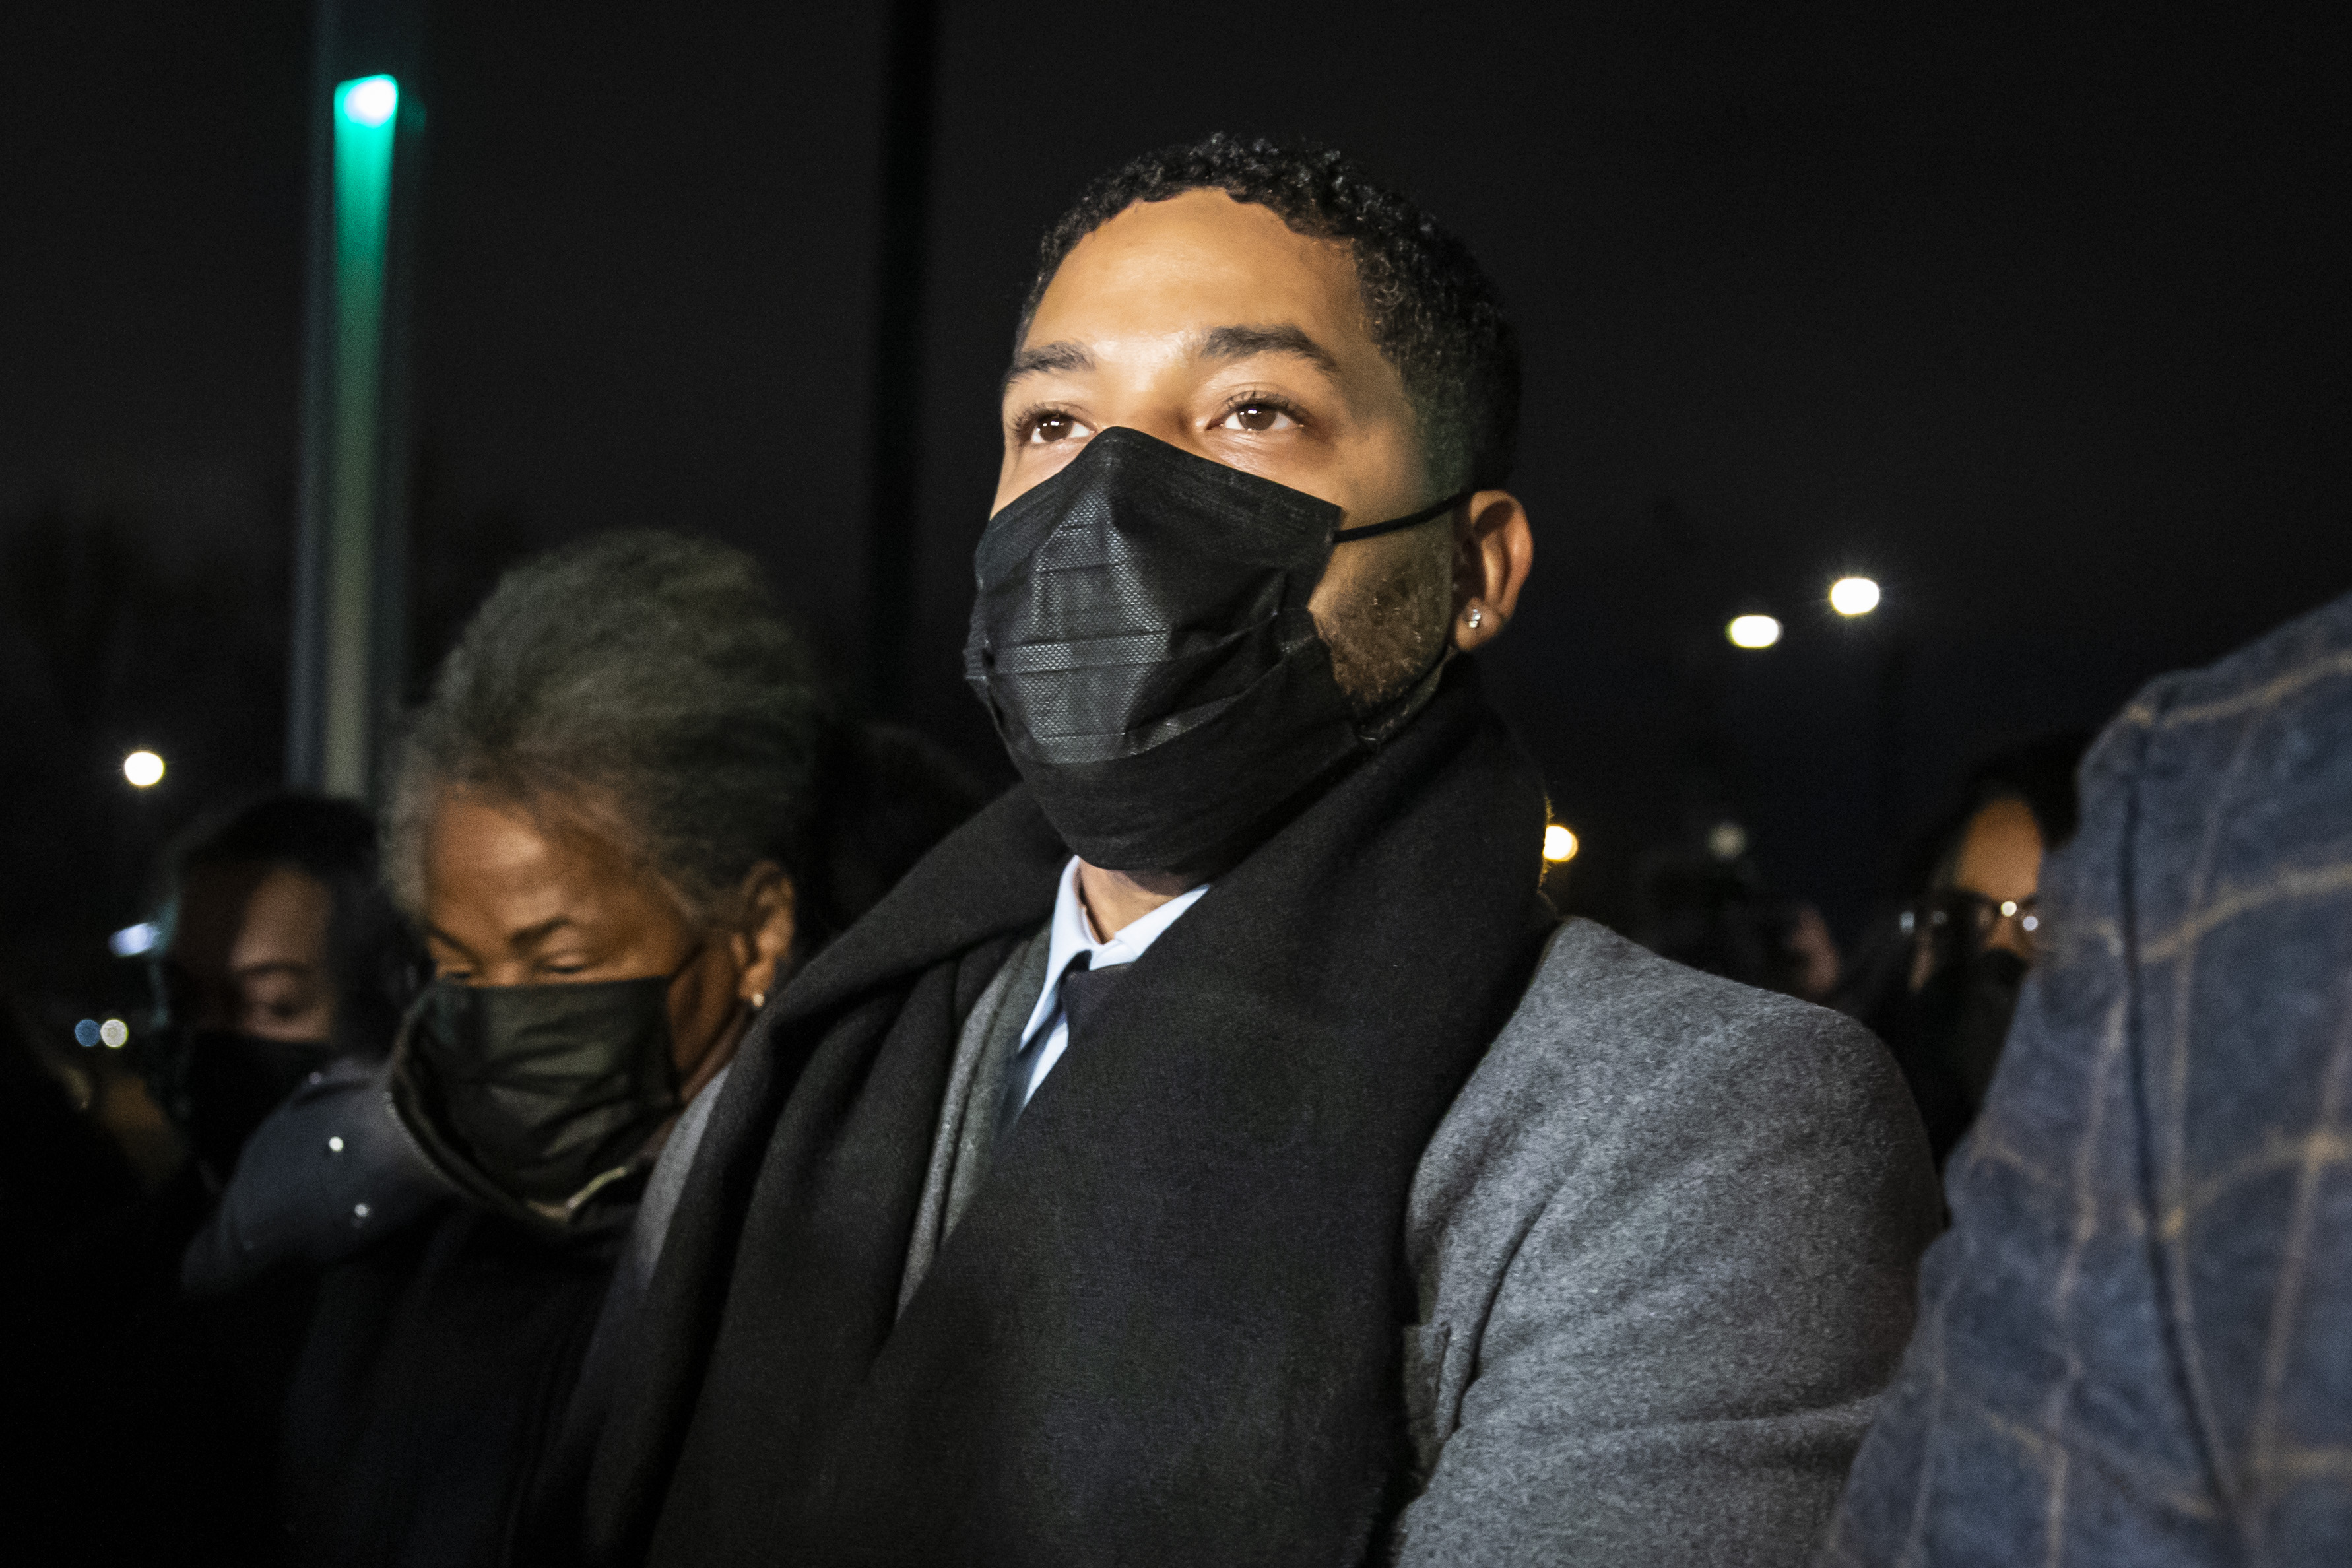 Flanked by family members, supporters, attorneys and bodyguards, former “Empire” star Jussie Smollett walks into the Leighton Criminal Courthouse after the jury reached a verdict, Thursday evening. 